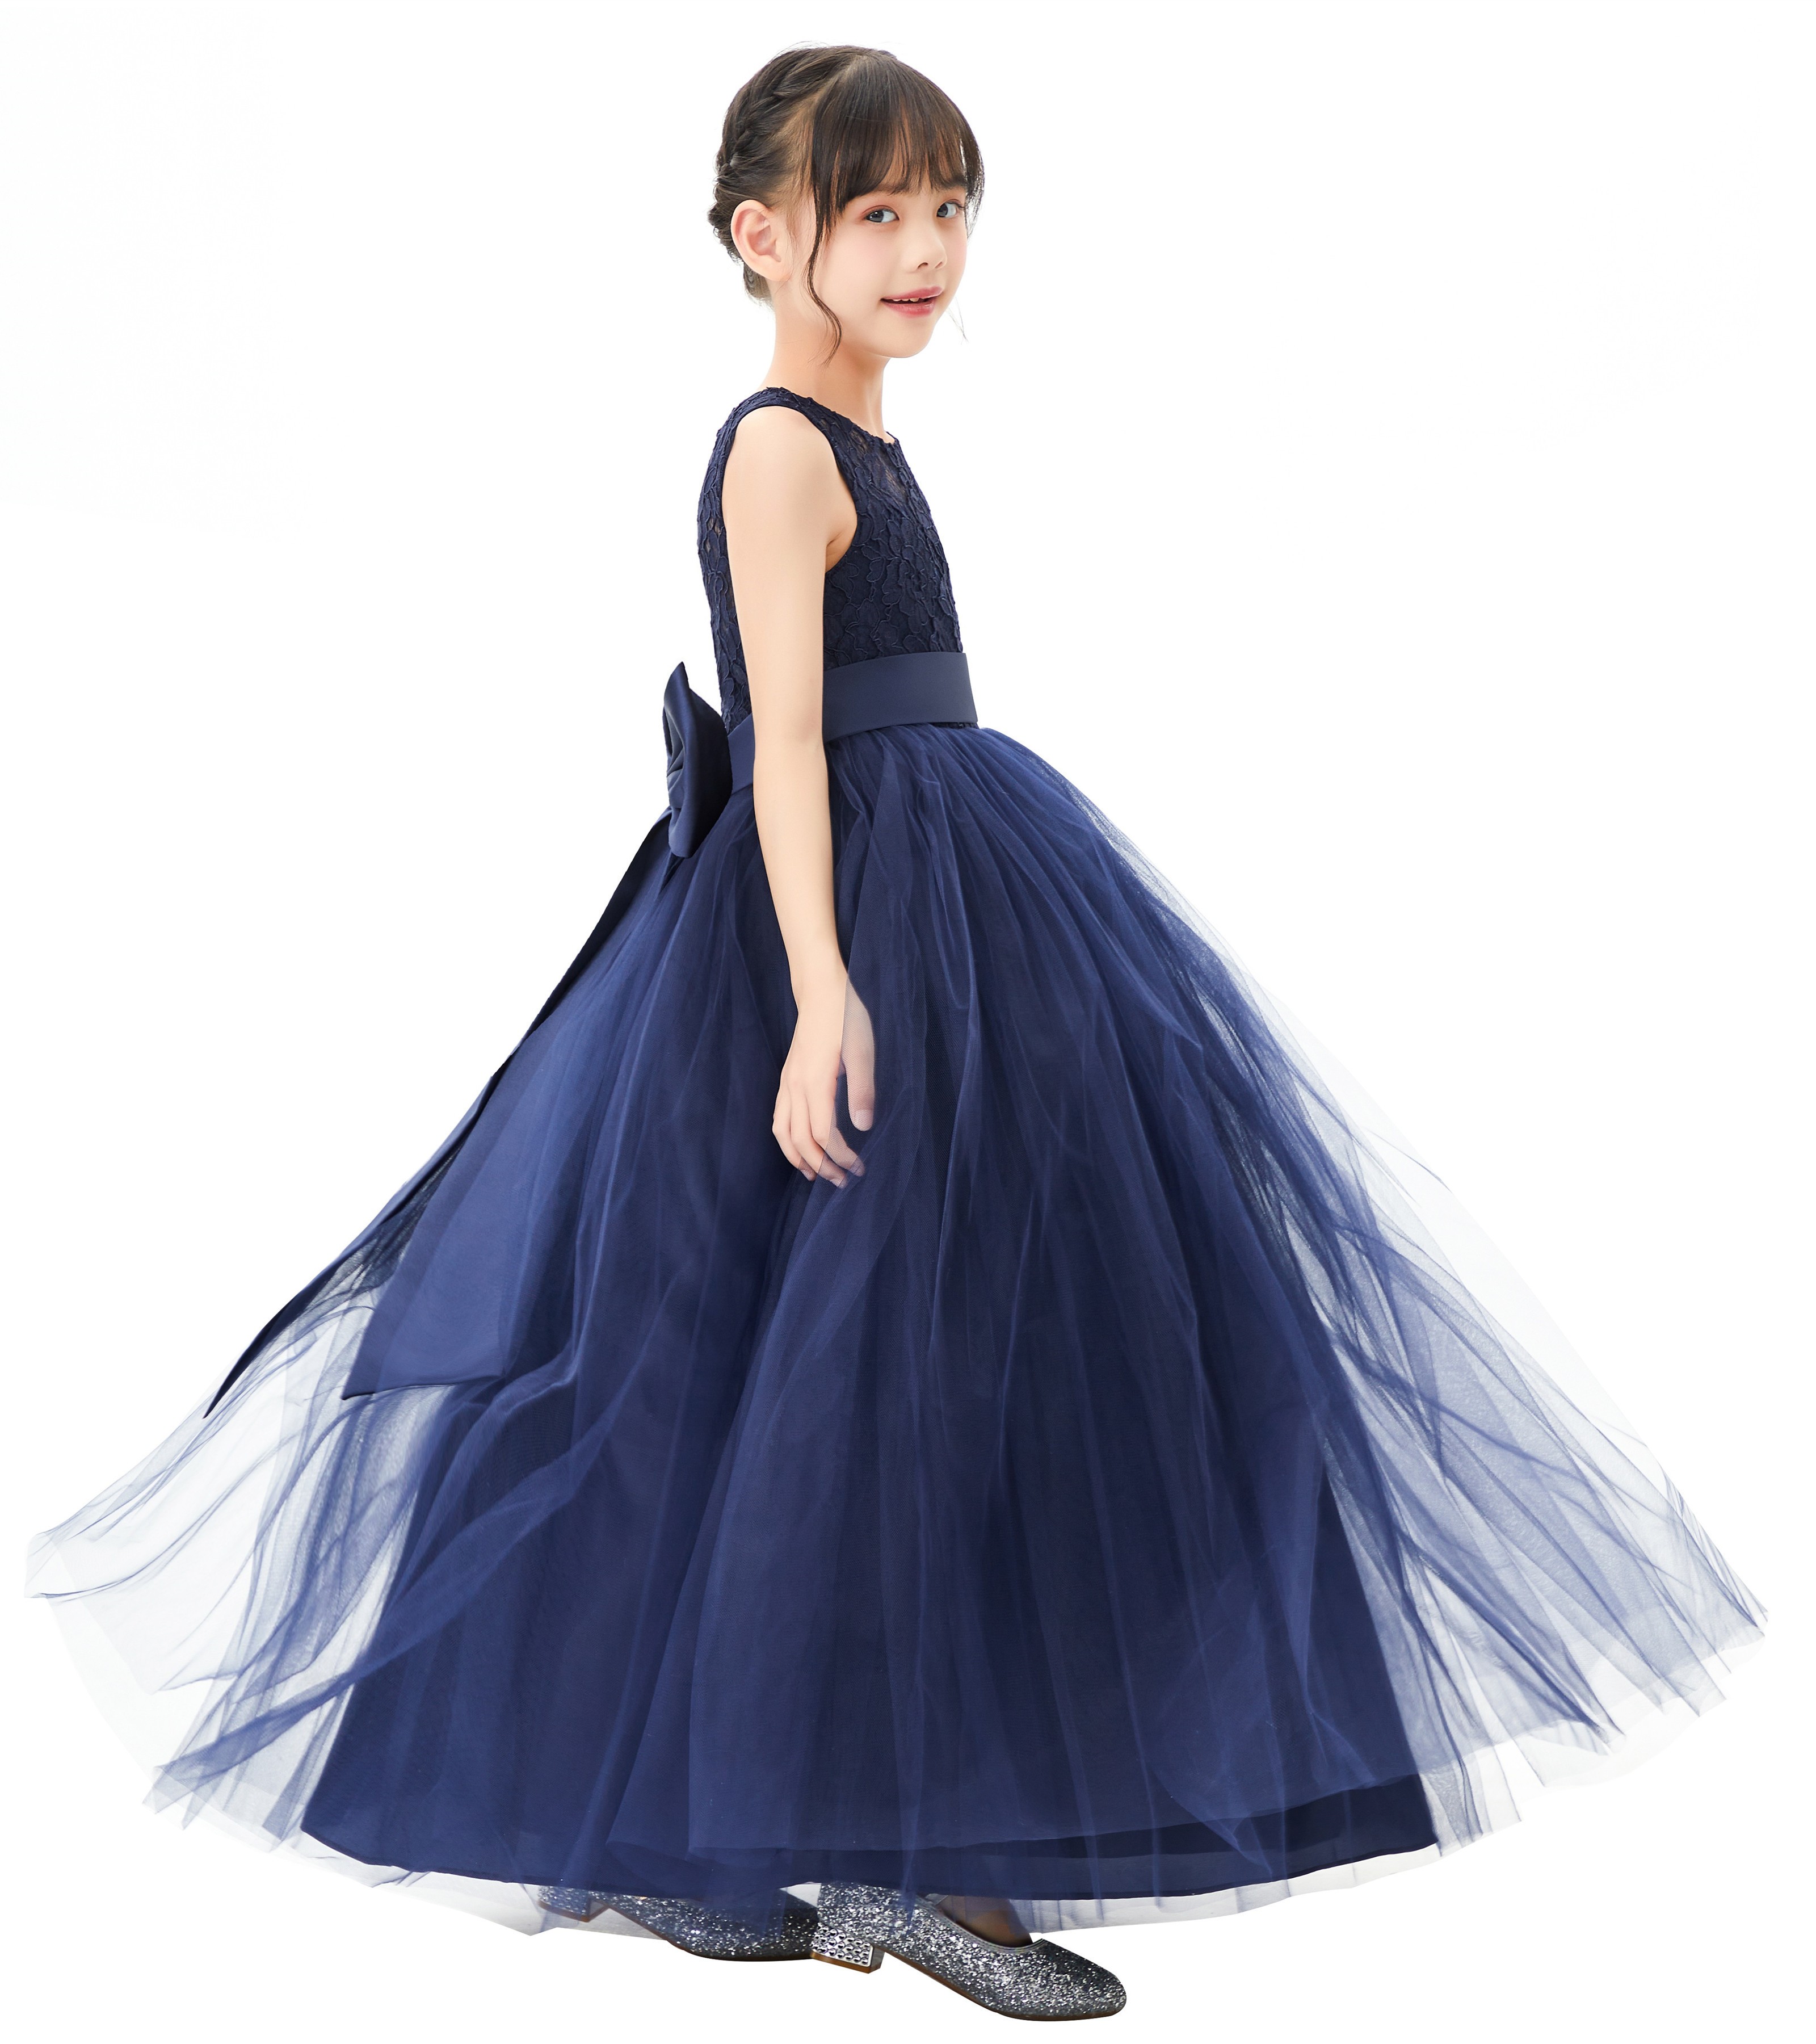 Navy Blue Illusion Lace Flower Girl Dress 331